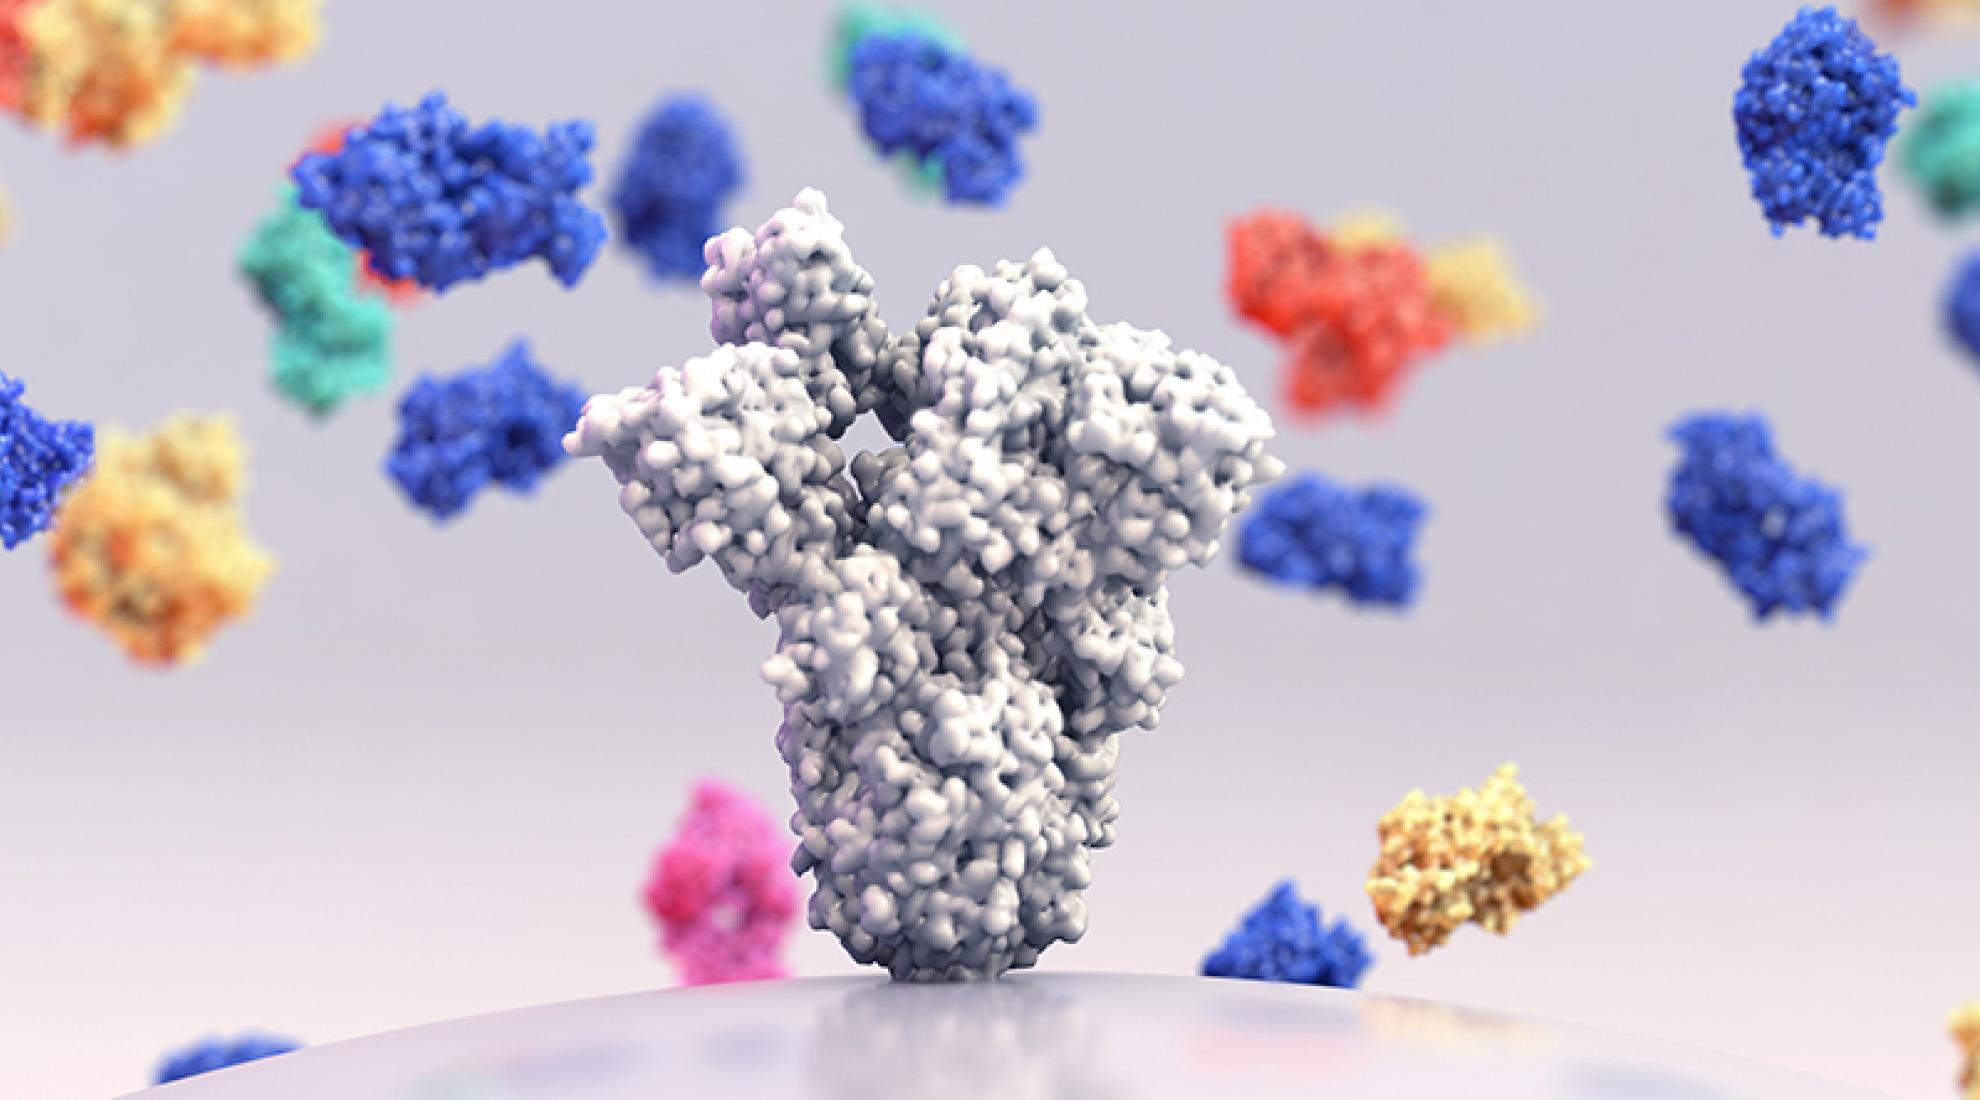 Swiss researchers discover super antibody against COVID-19